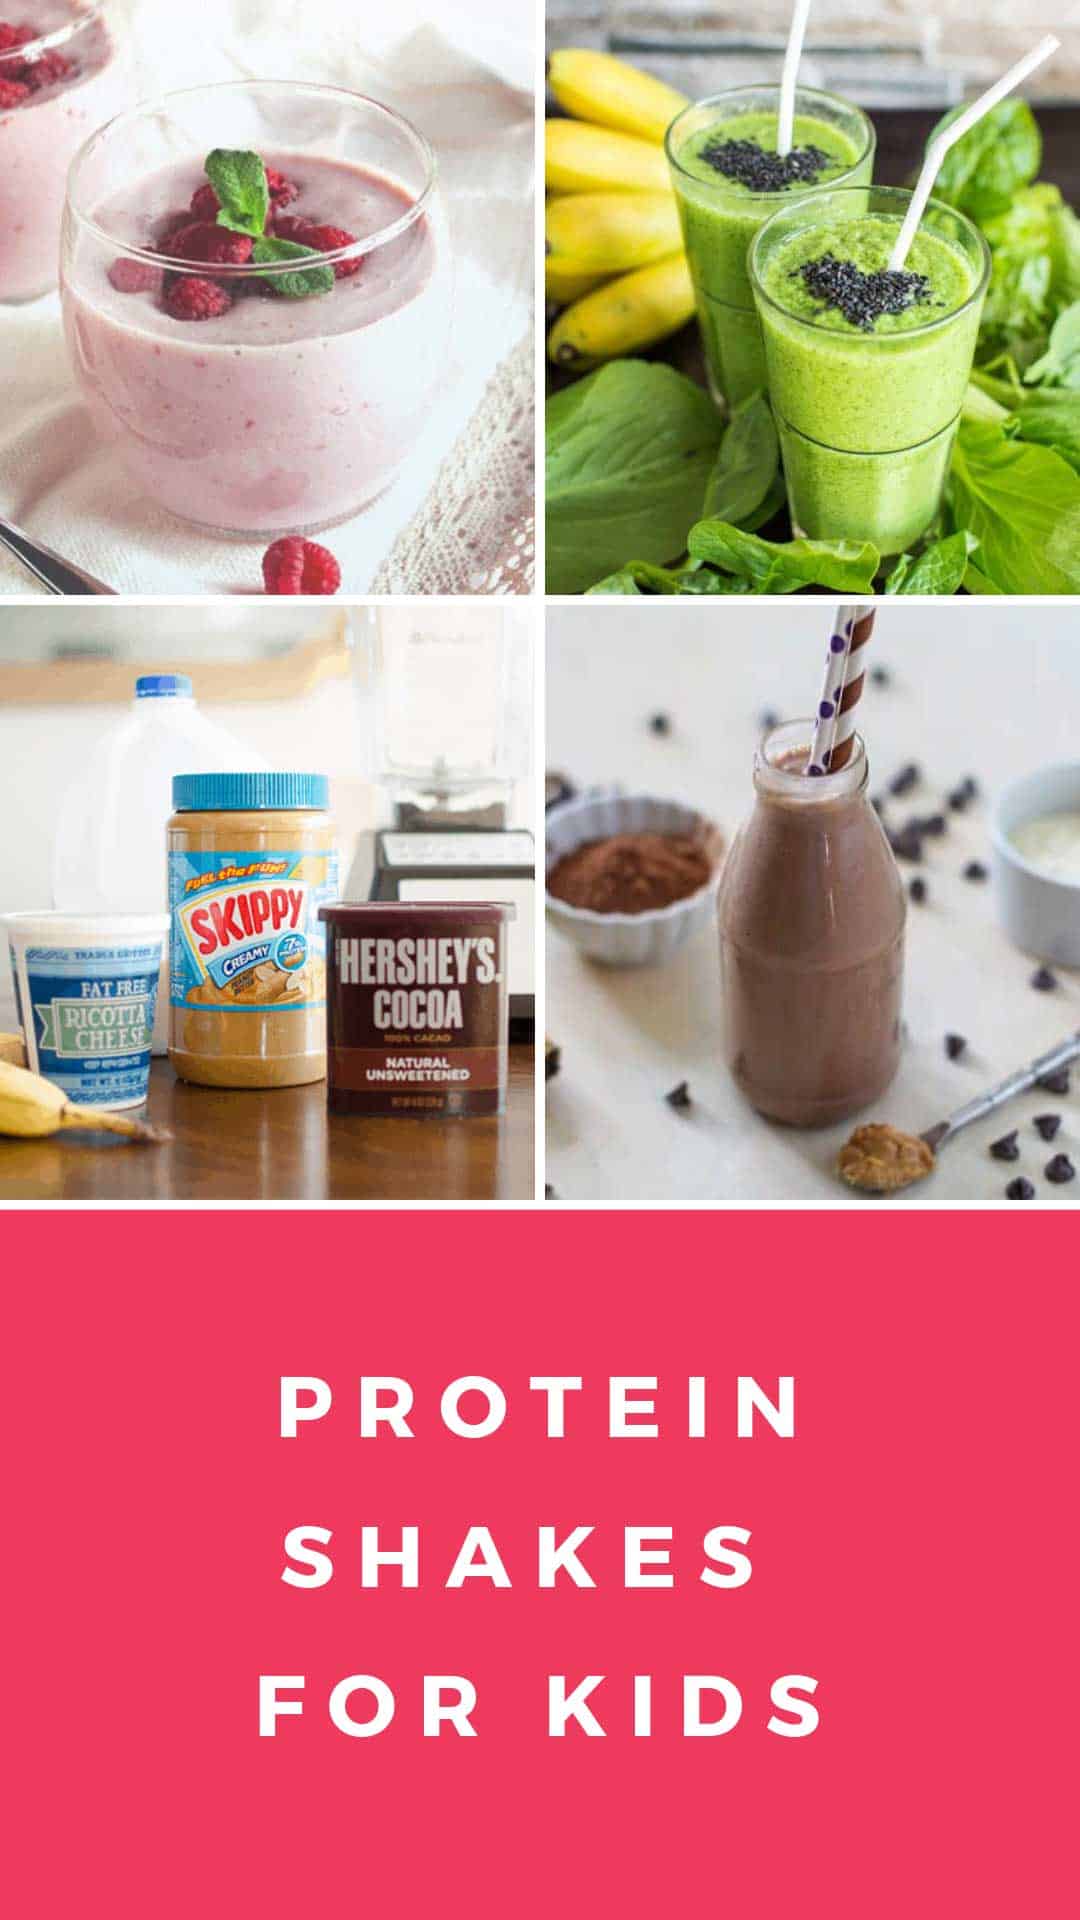 Loving these protein shakes for kids! The easiest way to get protein into picky eaters! 